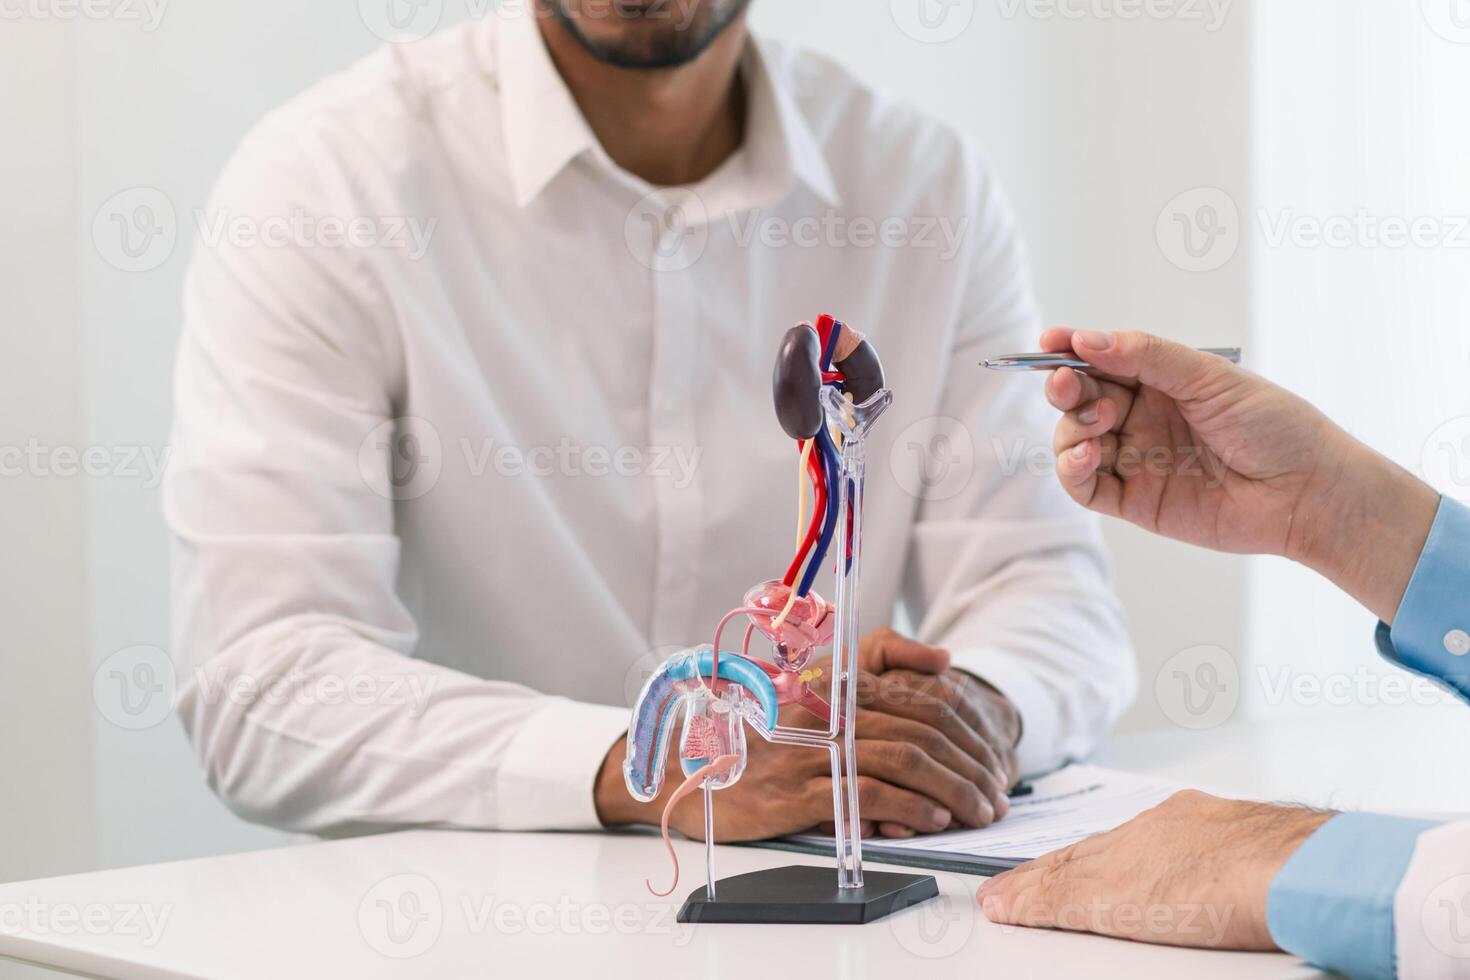 Doctors are counseling prostate cancer patients and using model of the penis to provide an example for prostate cancer patients about future symptoms and treatments. Prostate cancer treatment concepts photo